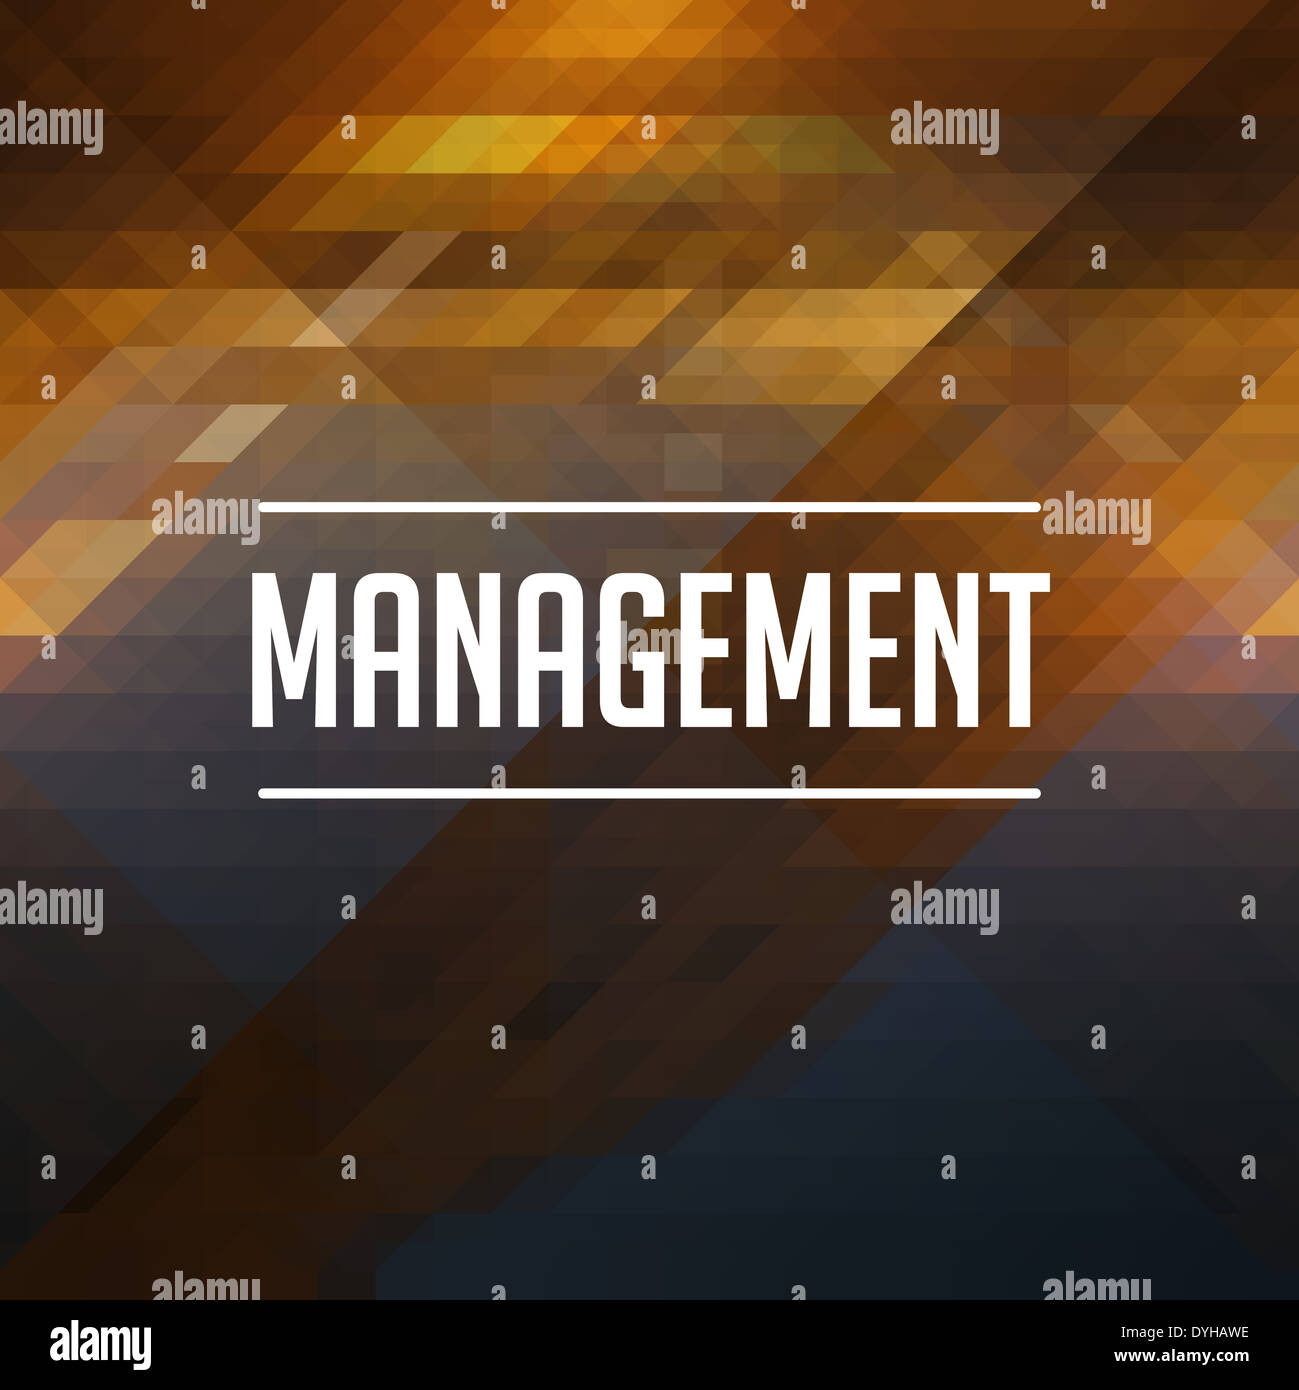 Management Concept. Retro design. Hipster background made of triangles, color flow effect. Stock Photo